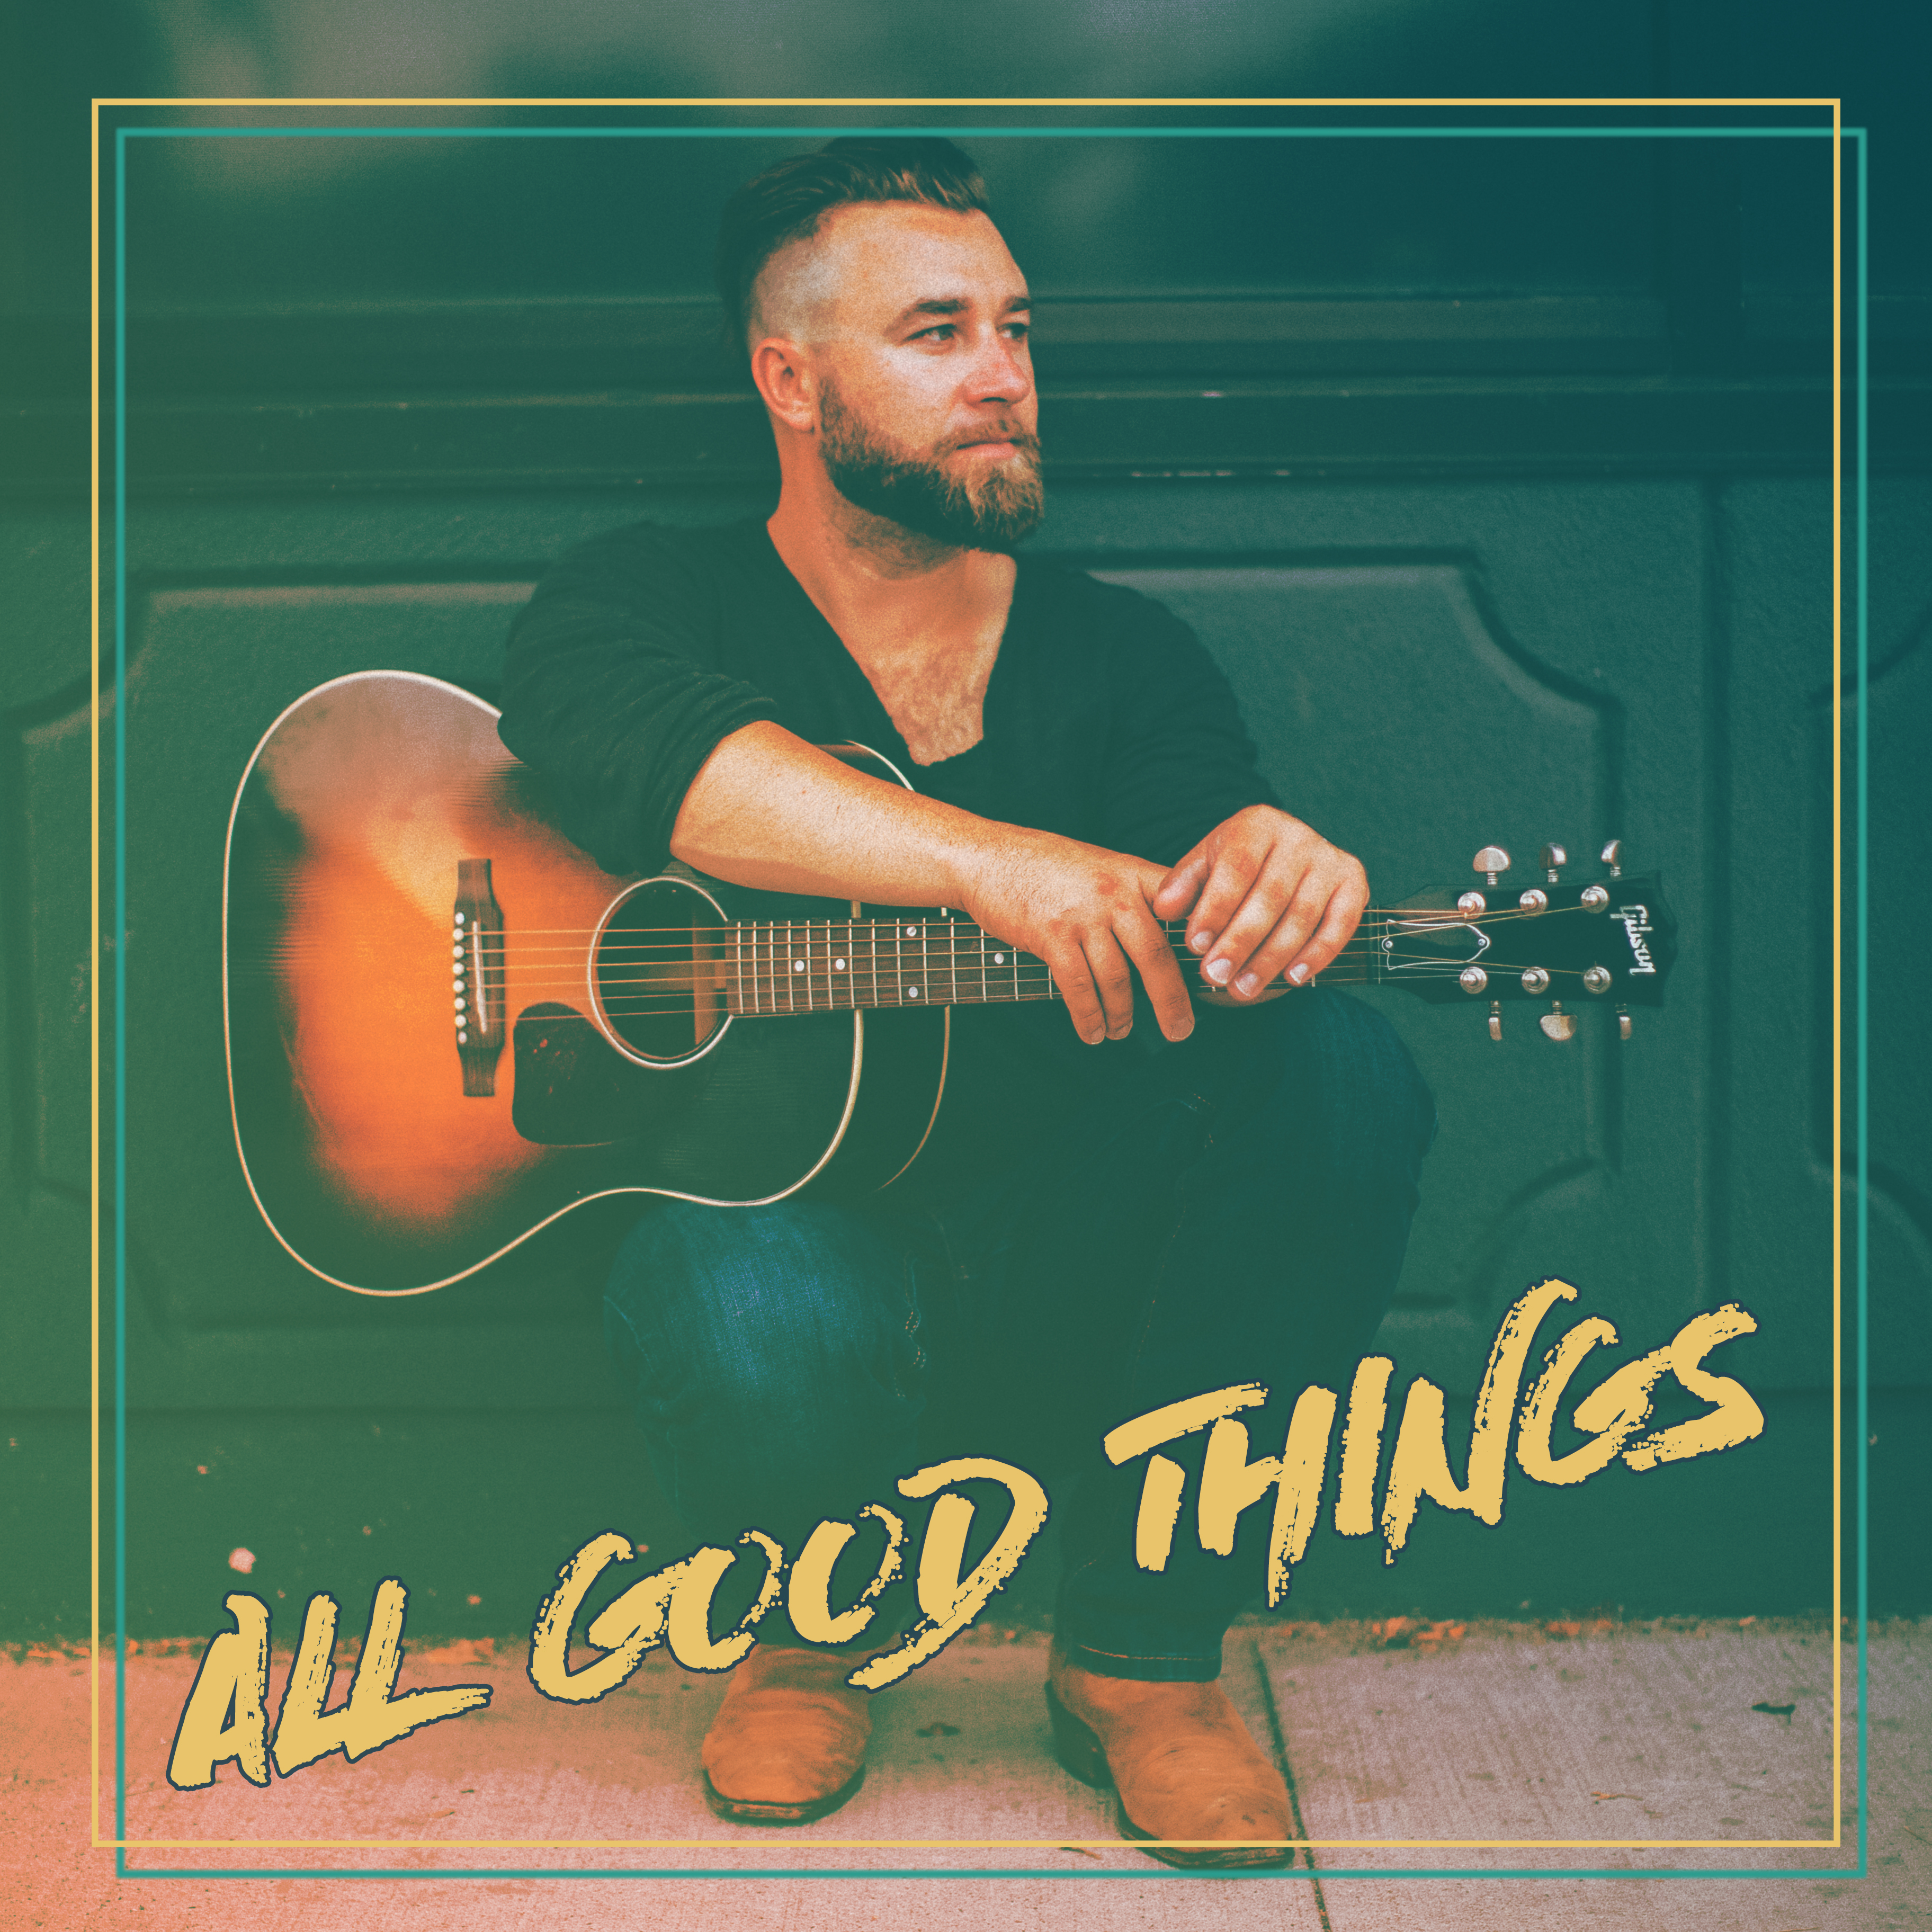 Musician Jud Hailey releases new single from album “All Good Things”